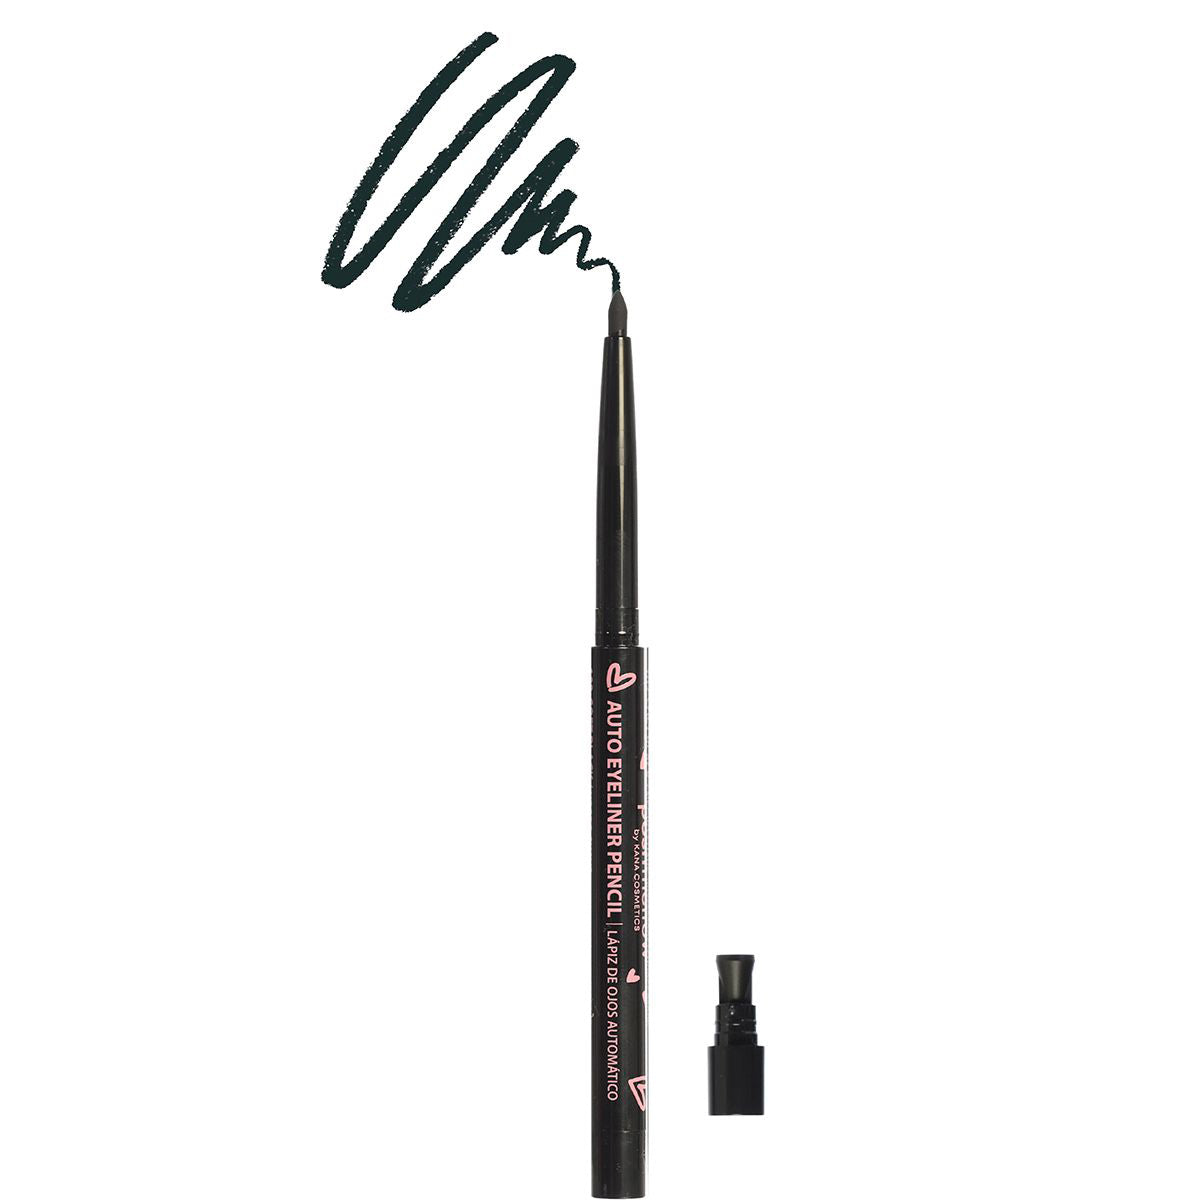 Automatic Eye liner Pencil - Black with Sharpener by Poshmellow